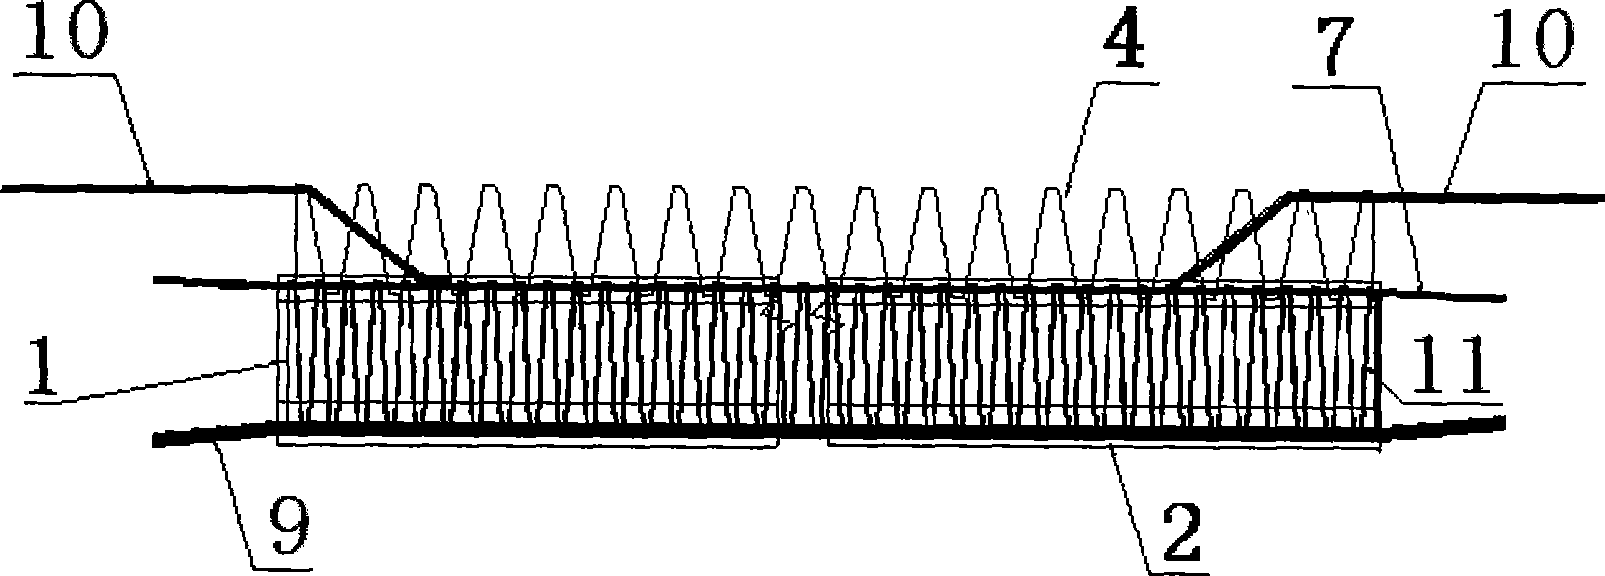 Prefabricated hollow superposed beam, and cast-in-situ construction method for beam and precast slab